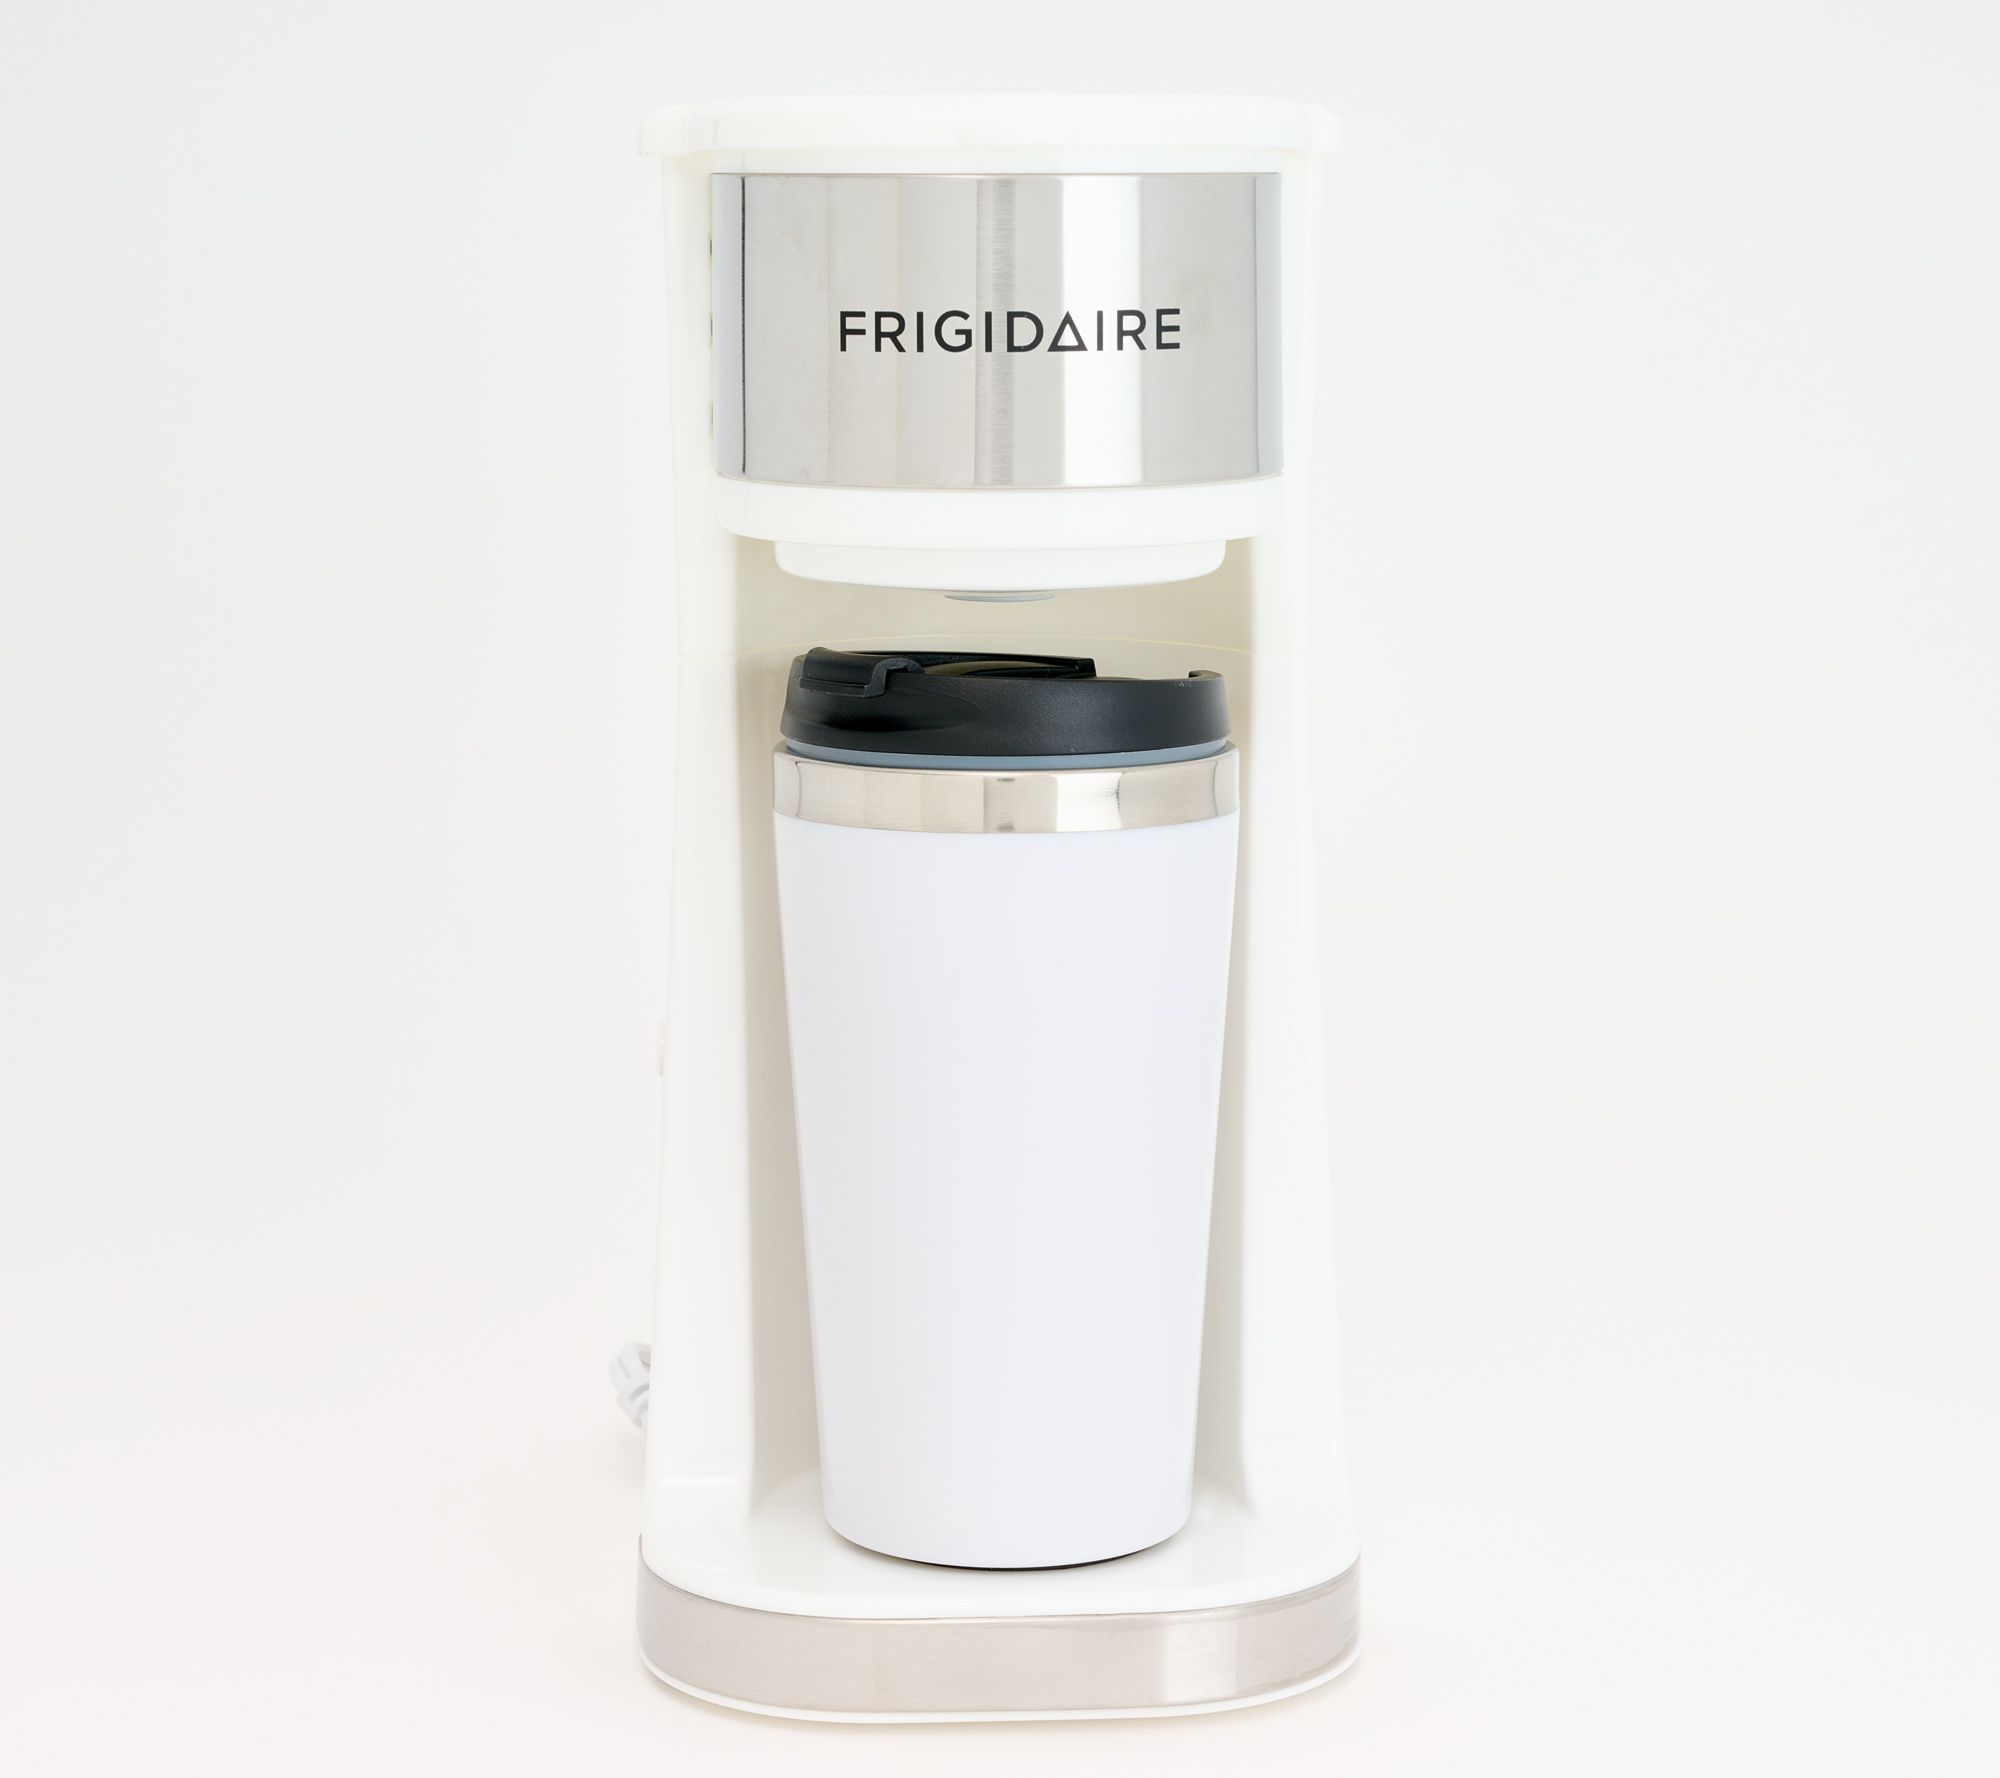 Frigidaire Stainless Steel Single Cup Coffee Maker with Travel Mug